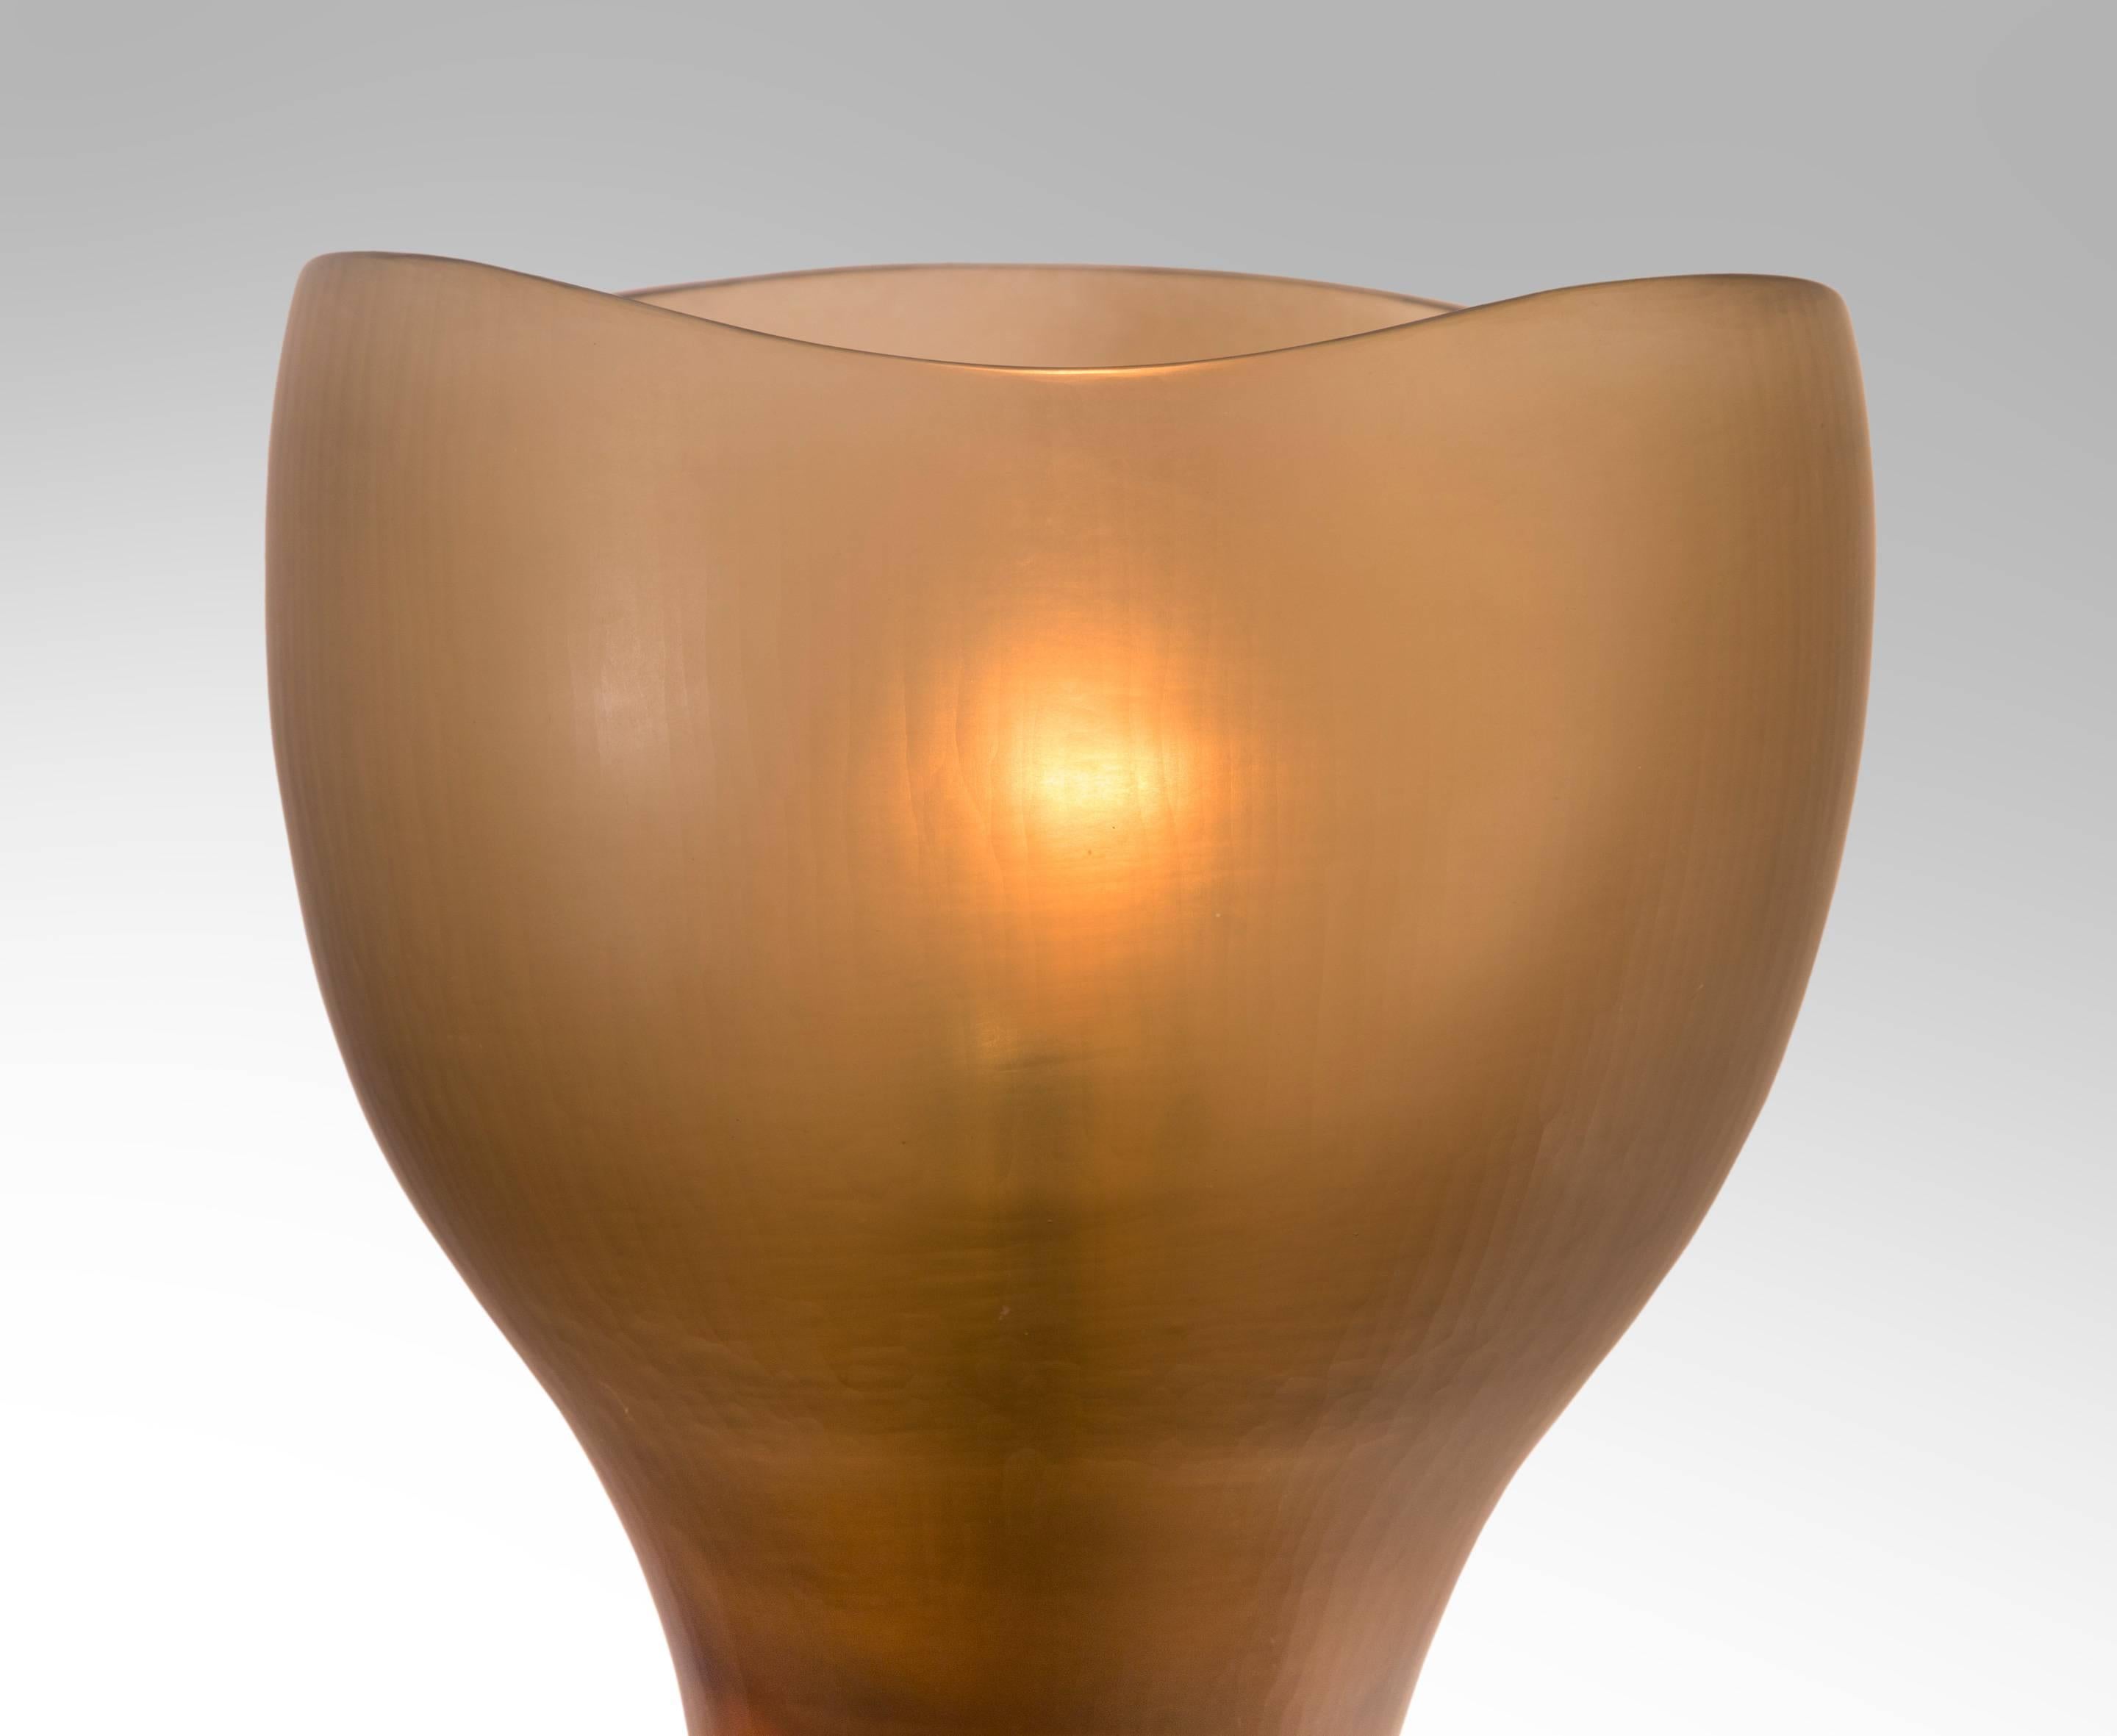 Very rarely available sconces manifest the genius of Tobia Scarpa. The goblet shaped battuto glass diffuser with a undulating mouth, containing a single light, mounted to a patinated brass back plate. 

A closely vase is illustrated by Franco